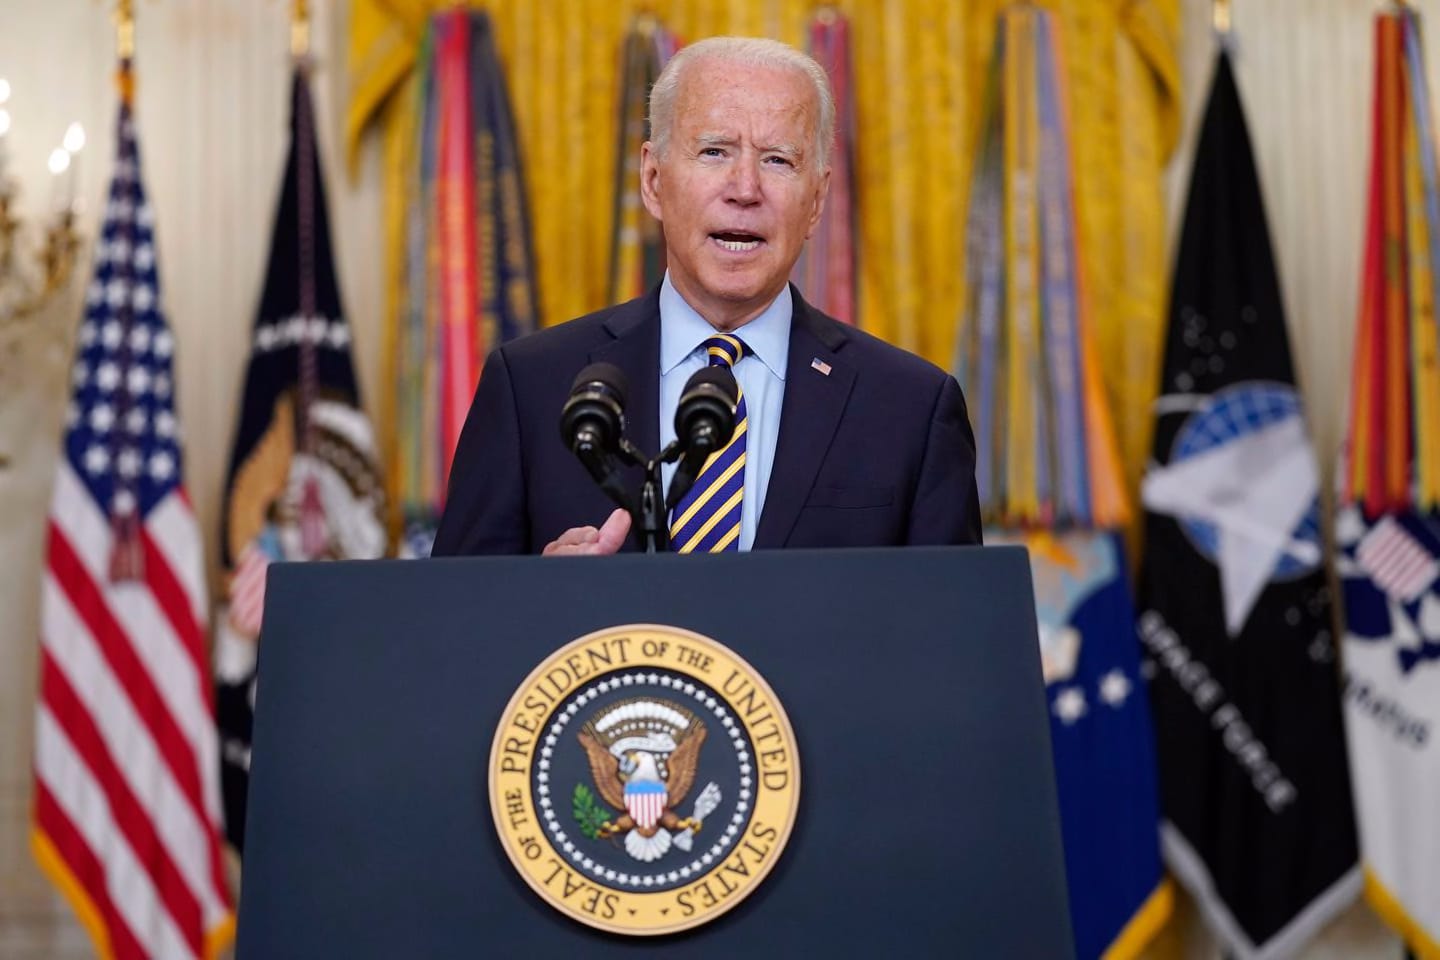 President Biden spoke about the American troop withdrawal from Afghanistan in the East Room of the White House on Thursday.